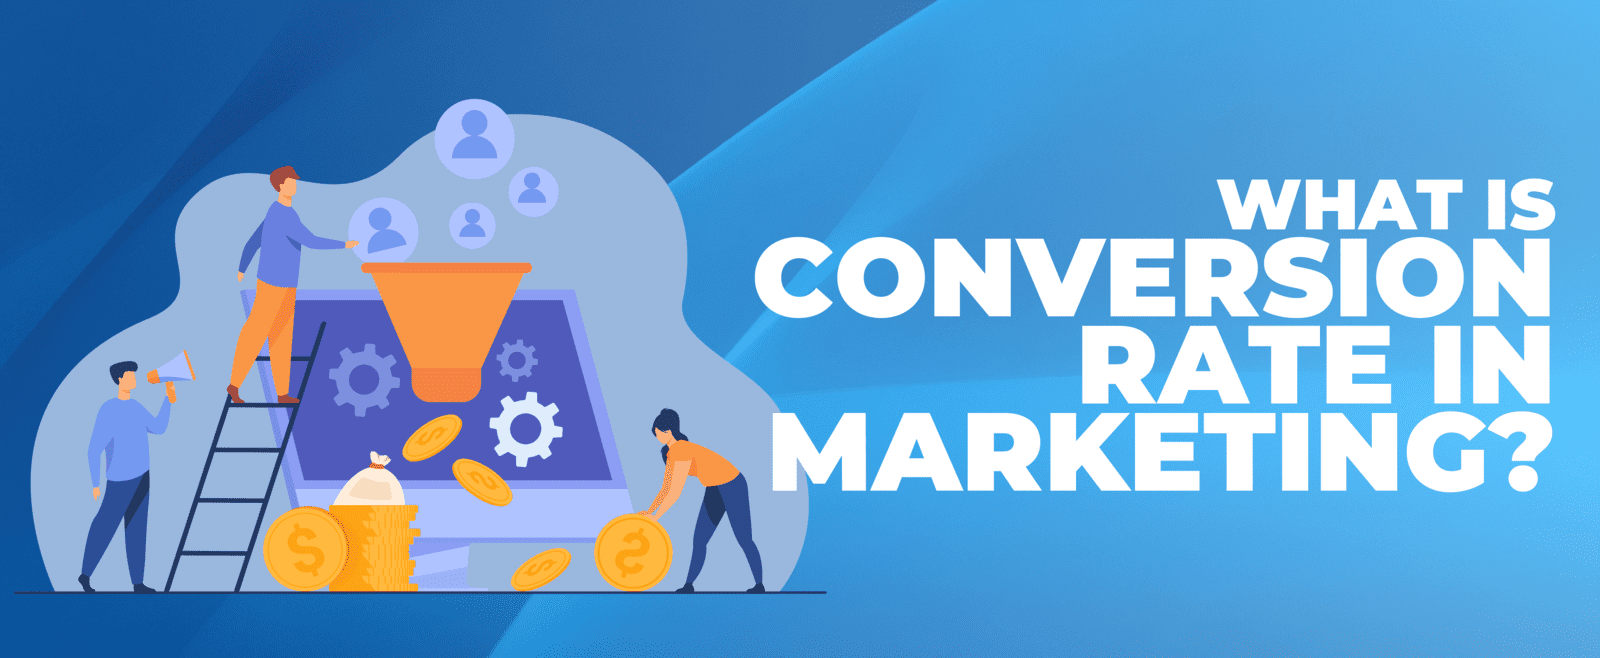 What is Conversion Rate in Marketing